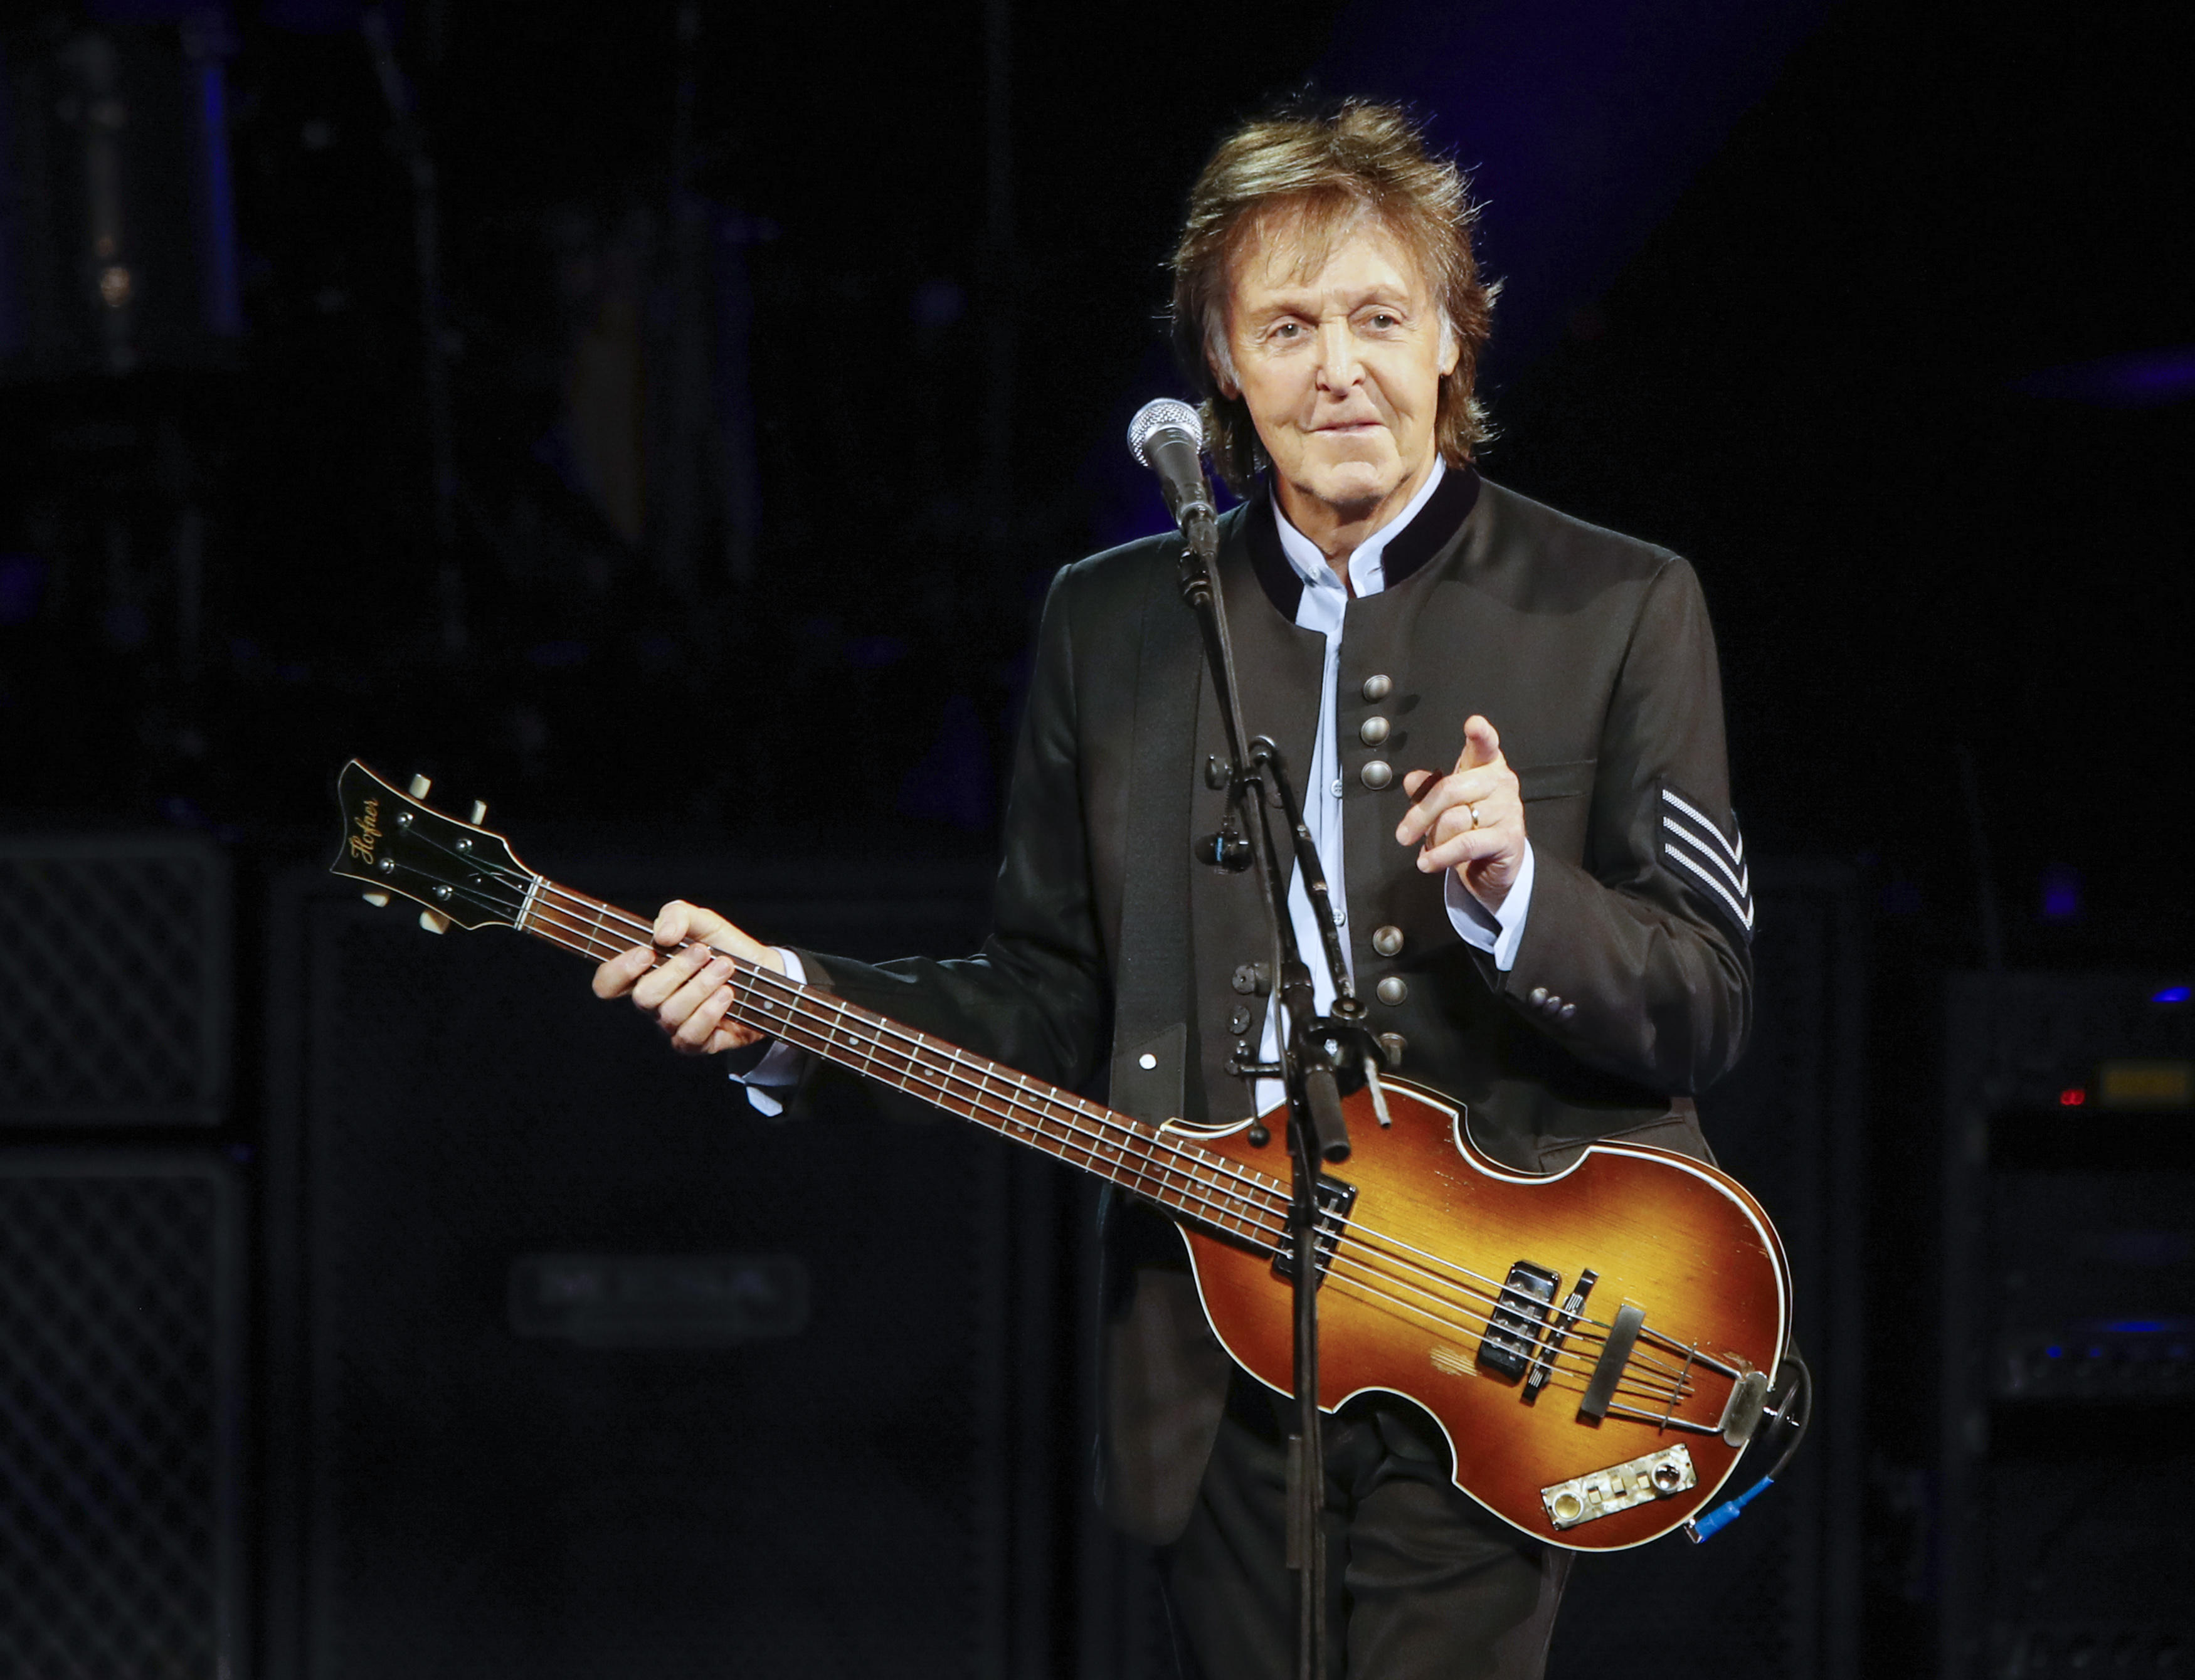 Paul McCartney gives "secret concert" at NYC's Grand Central CBS News